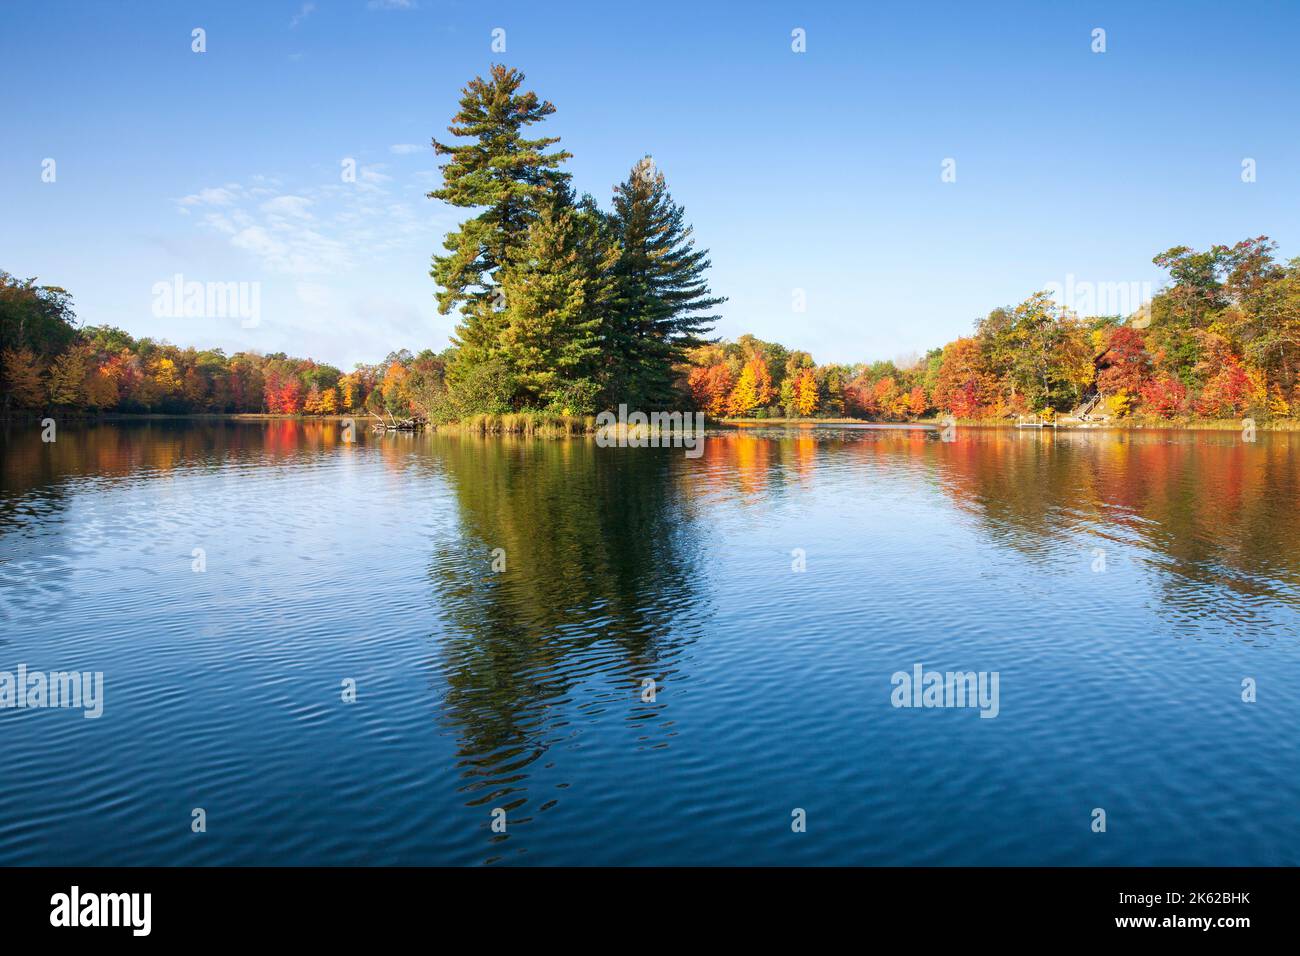 Pretty blue lake with trees in autumn color and a small island on a bright morning Stock Photo